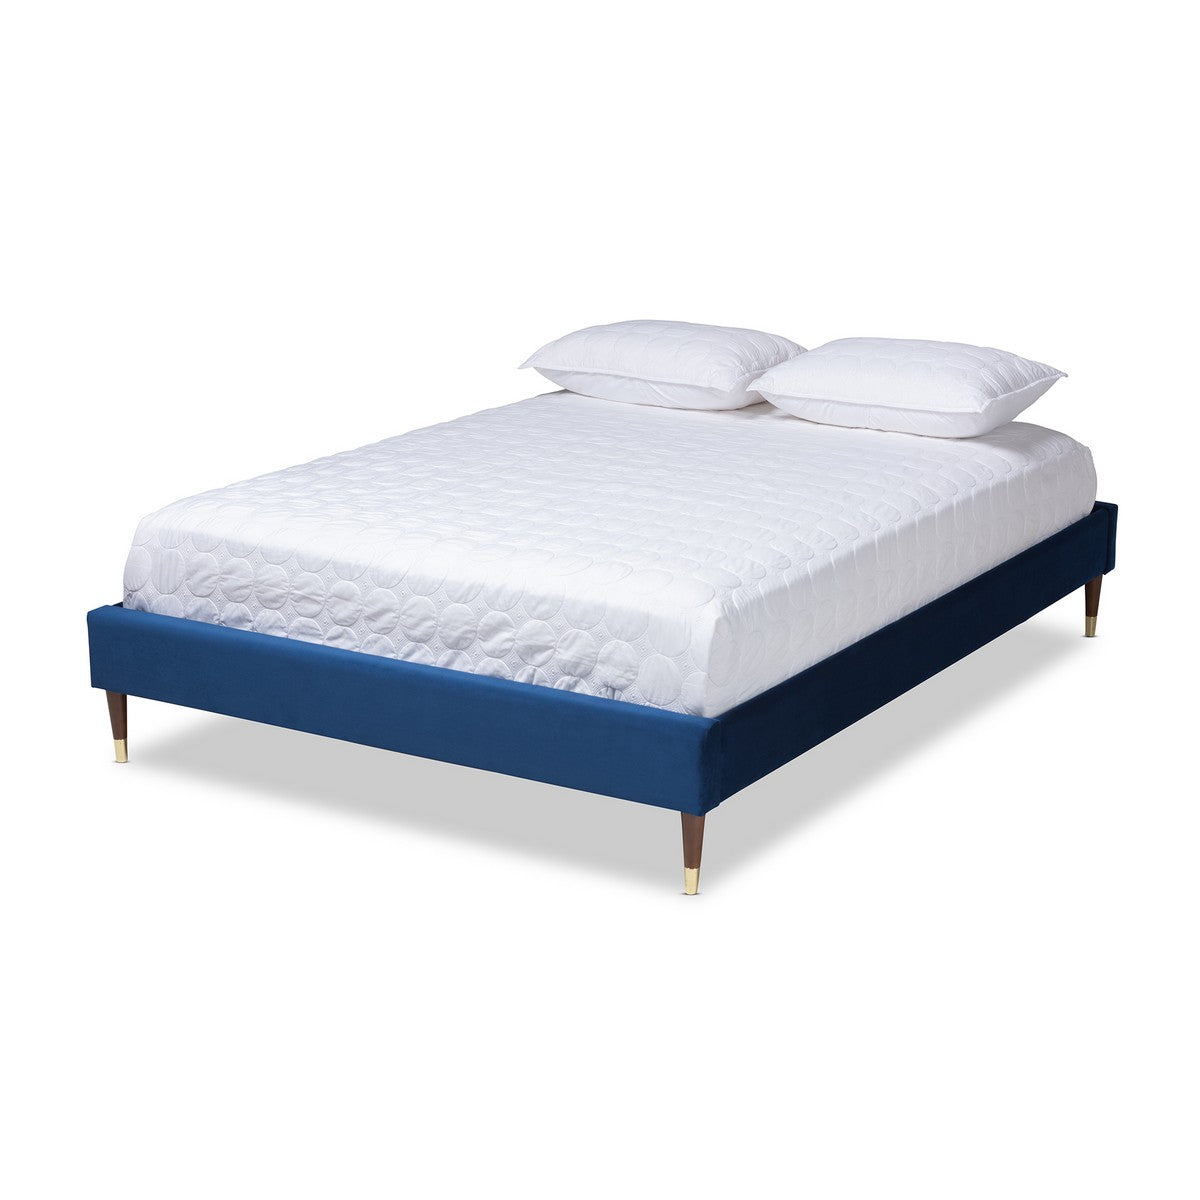 Baxton Studio Volden Glam and Luxe Navy Blue Velvet Fabric Upholstered Full Size Wood Platform Bed Frame with Gold-Tone Leg Tips Baxton Studio-Bed Frames-Minimal And Modern - 1